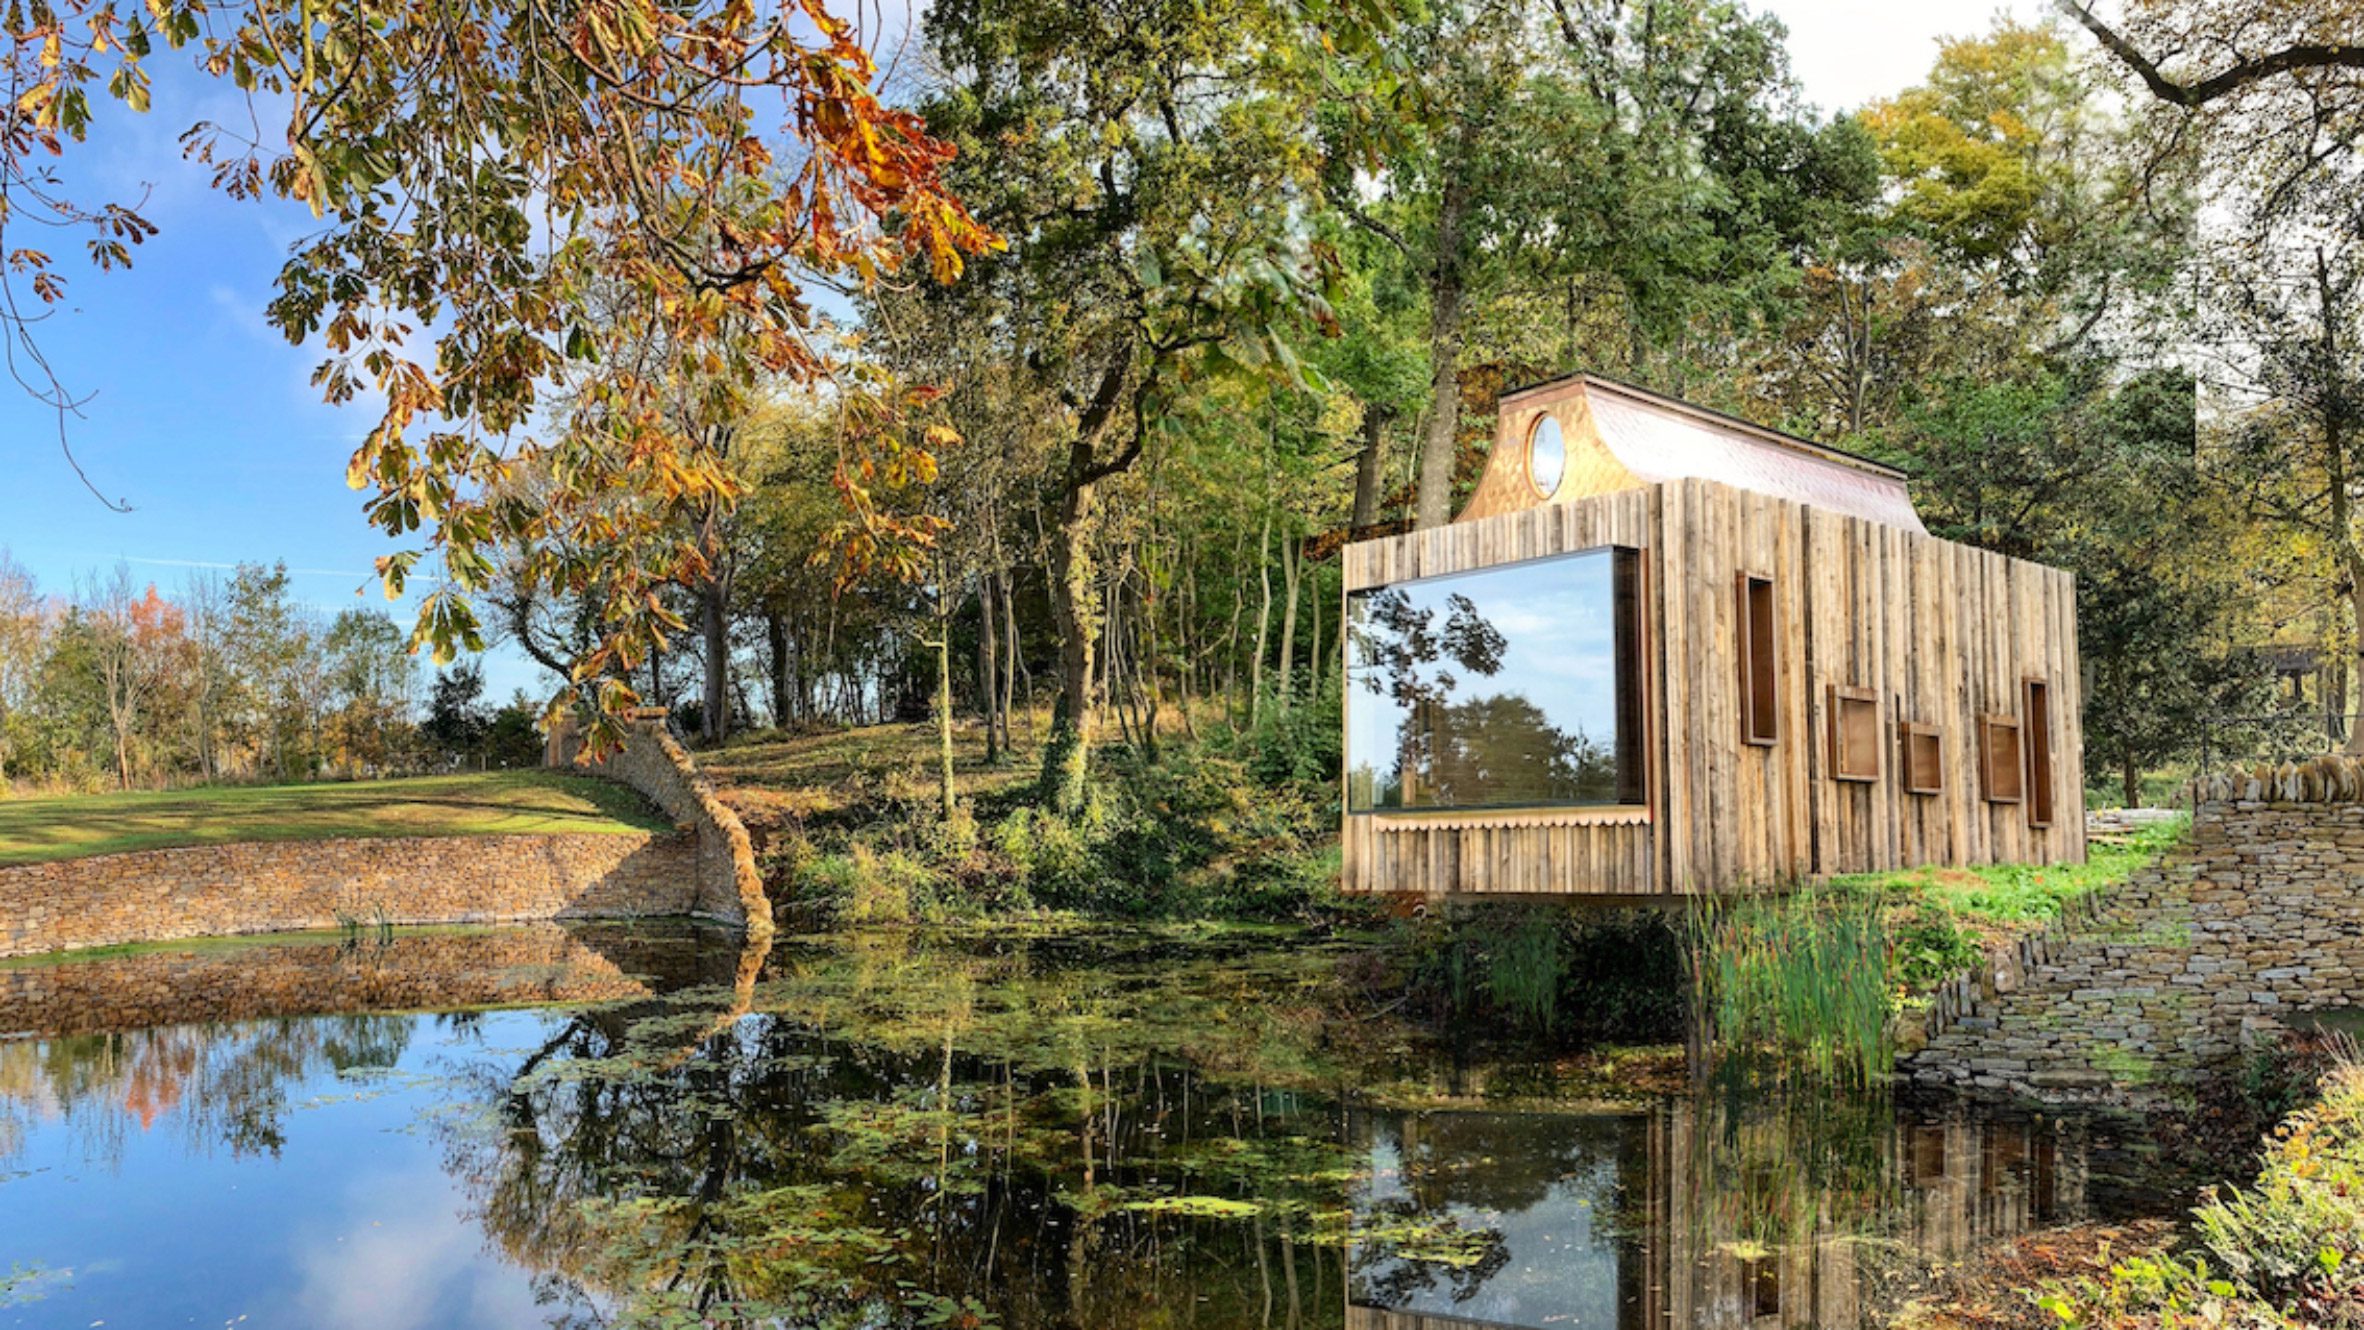 Lake view of The Beezantium by Invisible Studio at The Newt in Somerset